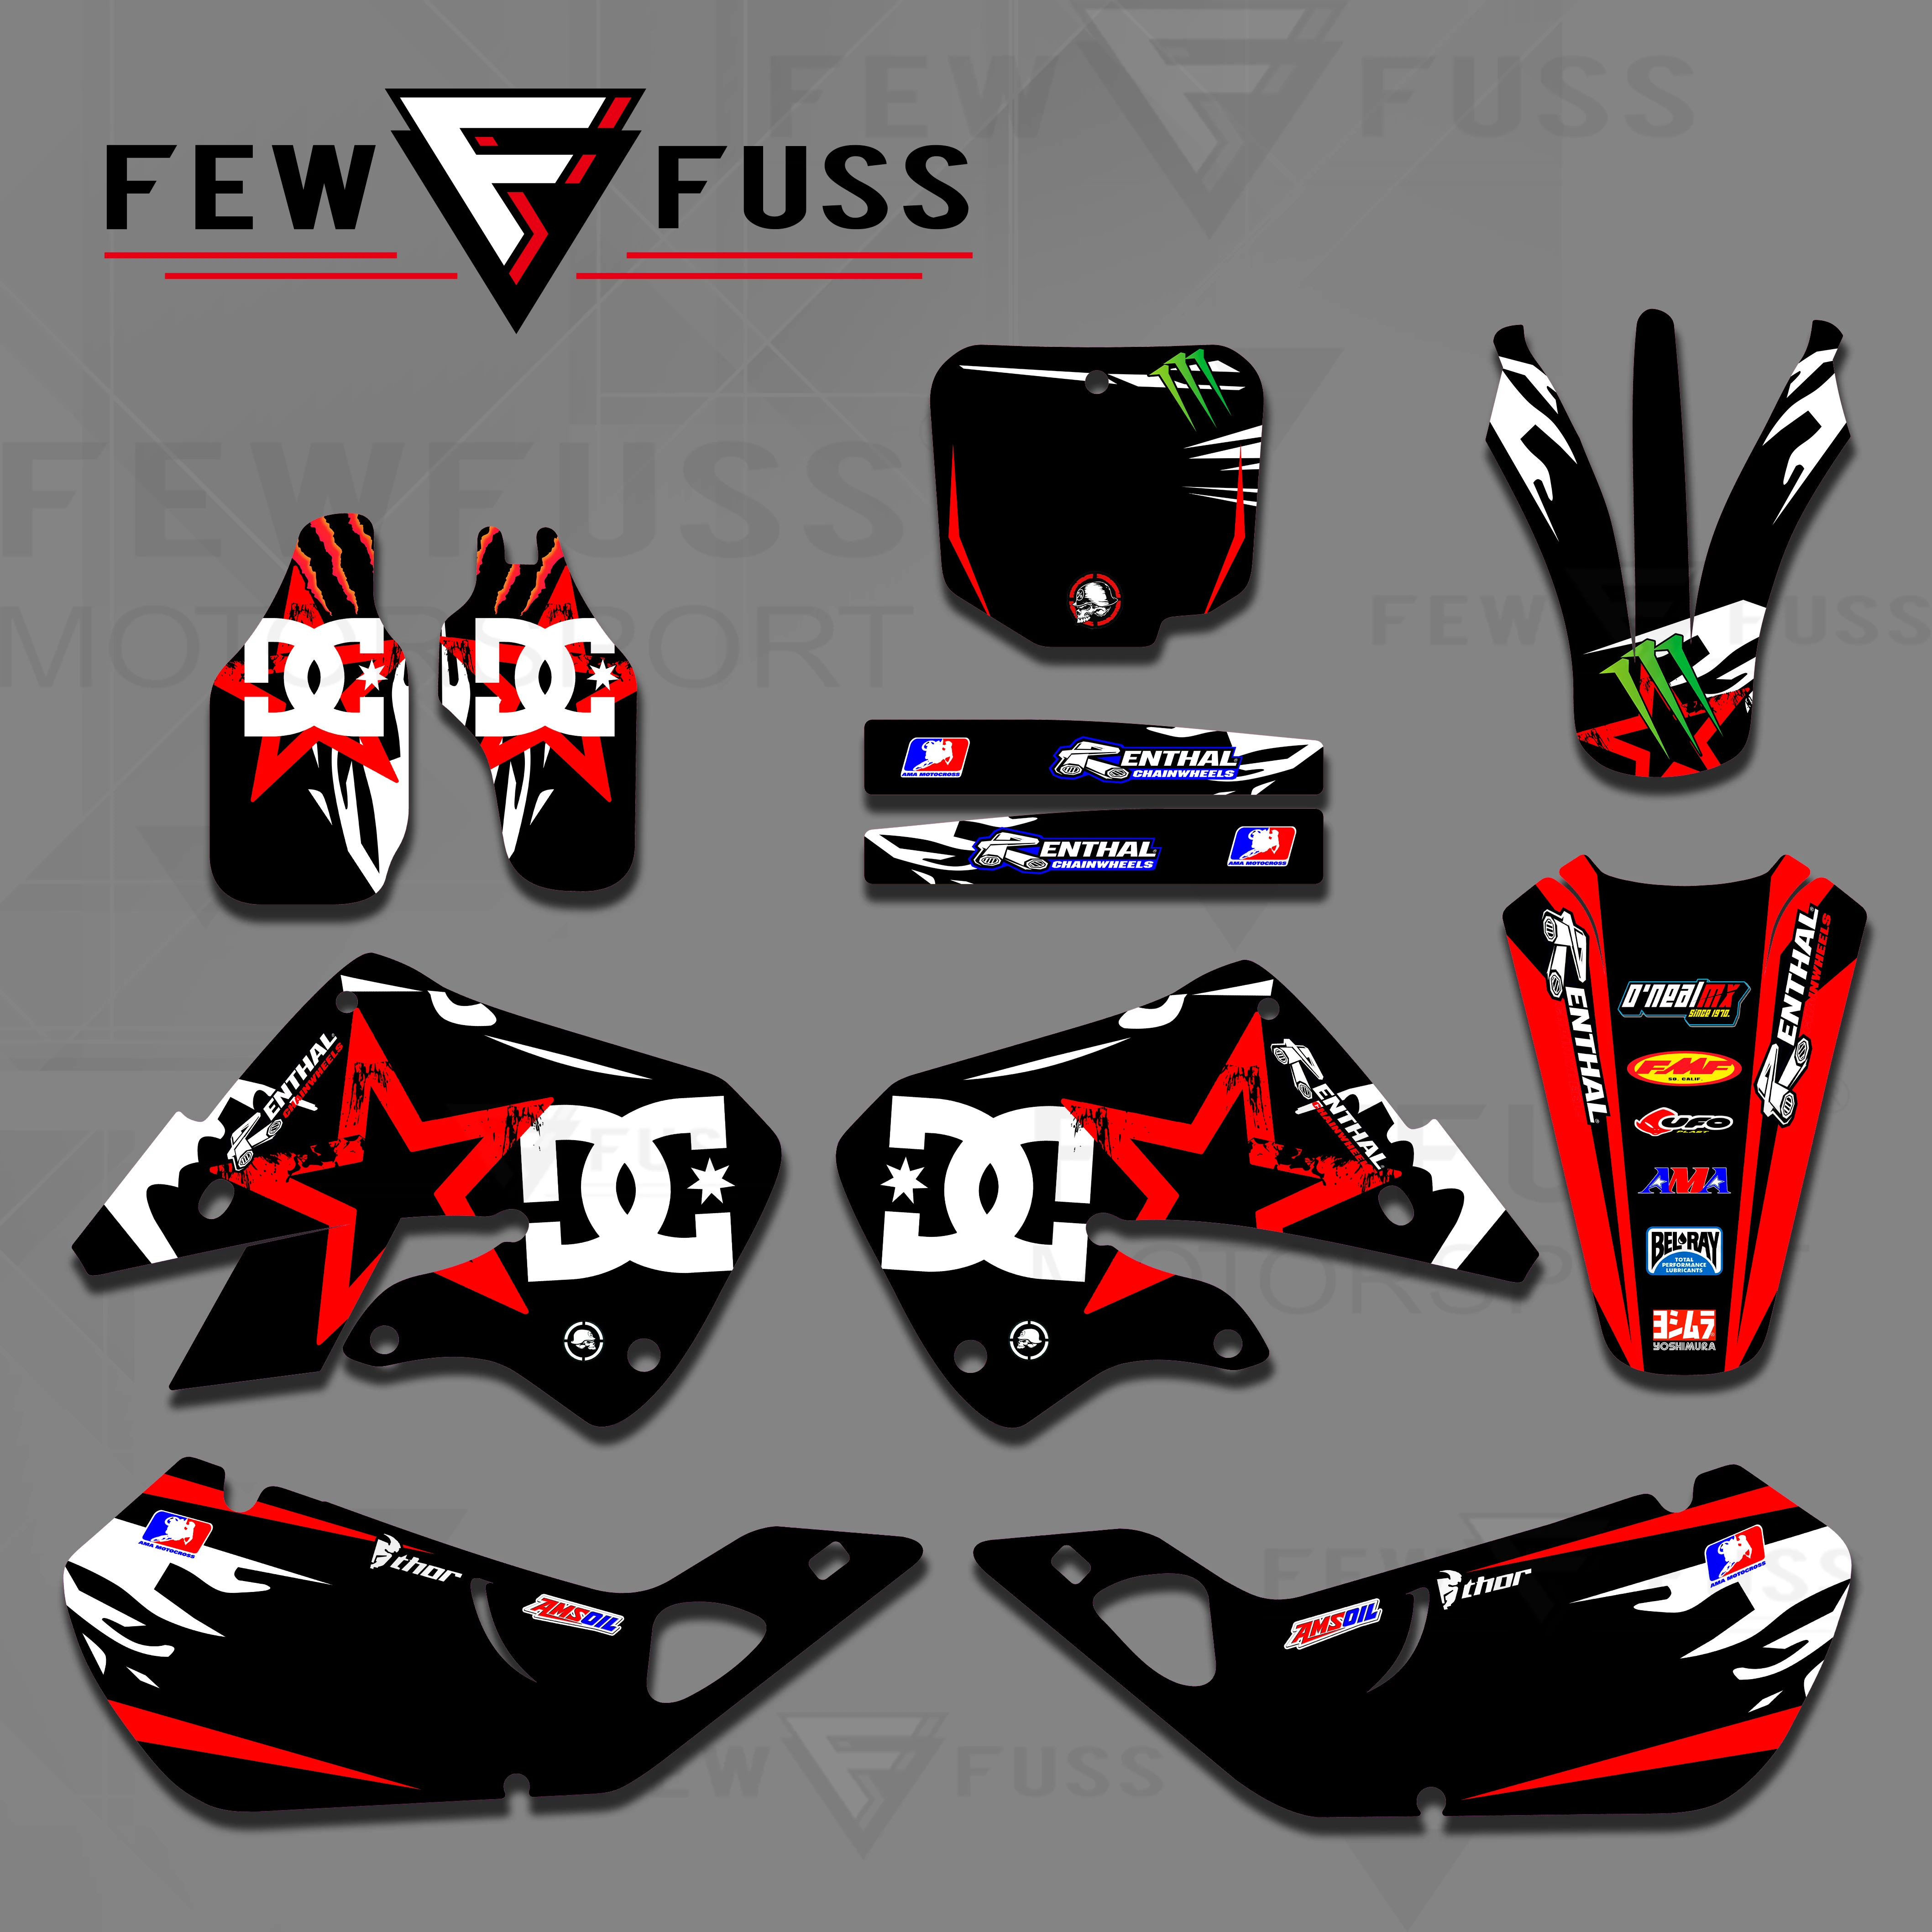 FEWFUSS New Style Red &White TEAM DECALS GRAPHICS & BACKGROUNDS Stickers For Honda CR125 CR250 1997 1998 1999 CR 125 250